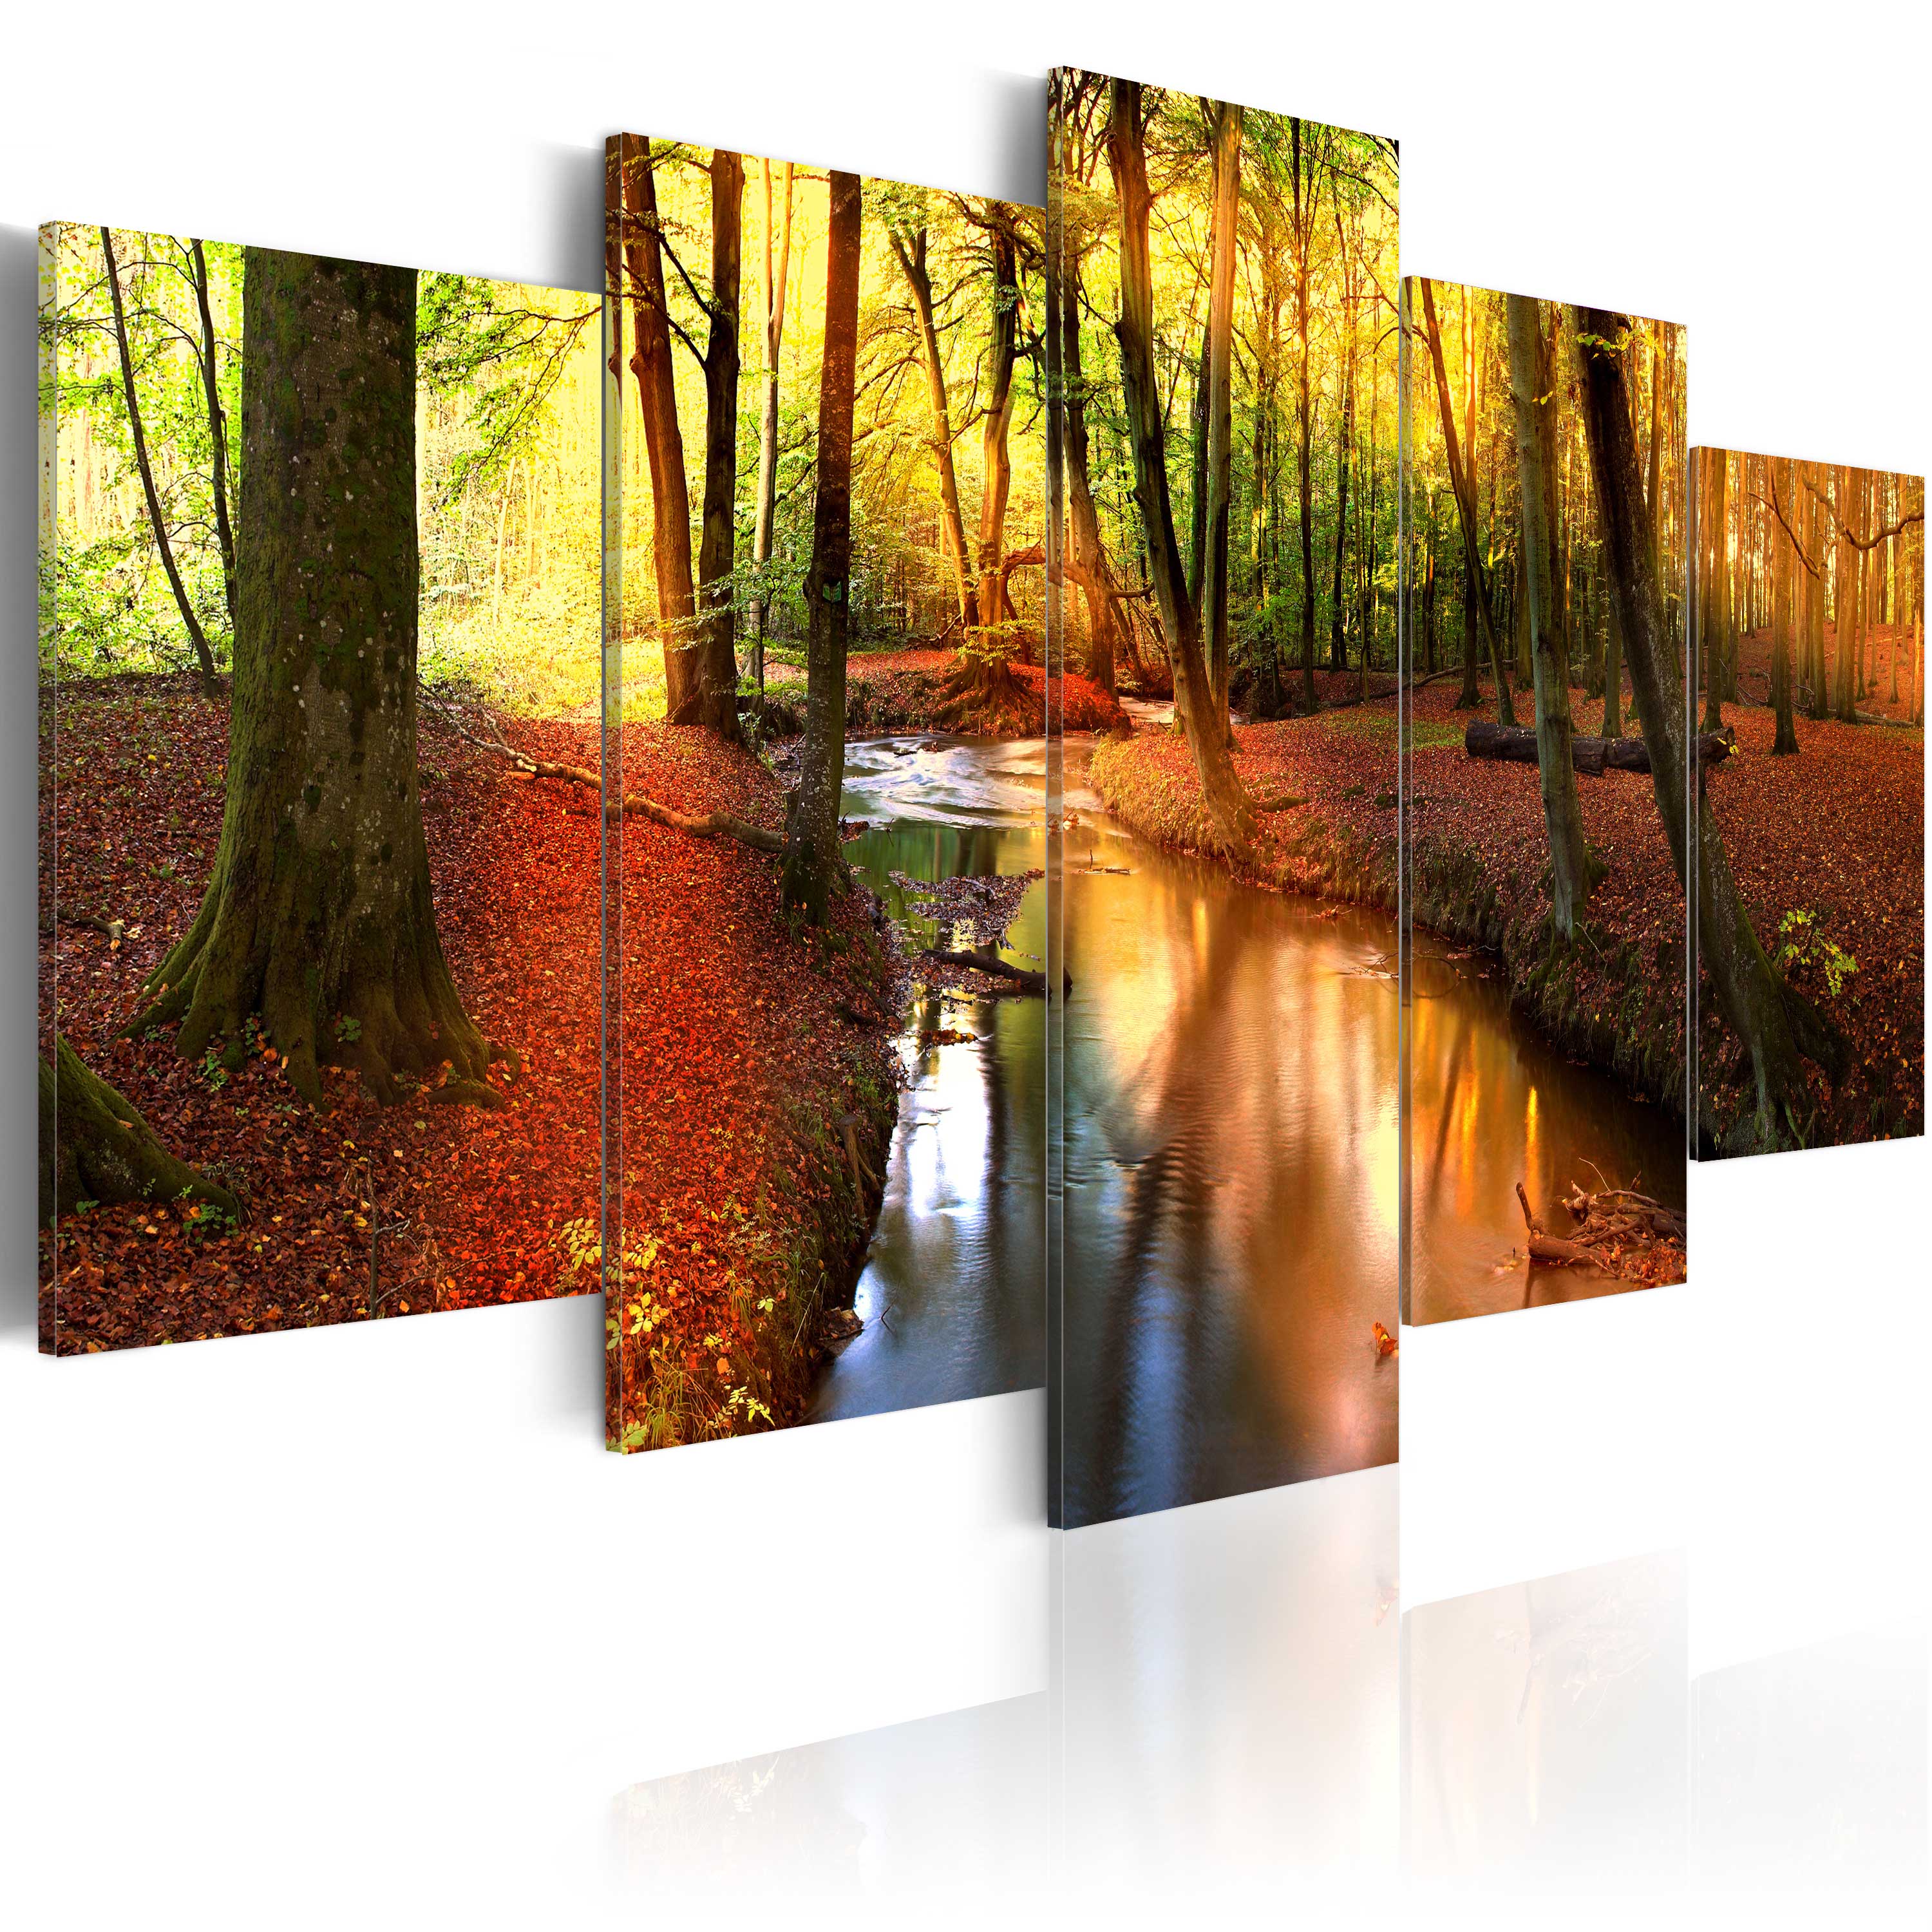 Canvas Print - Silent forest - 100x50